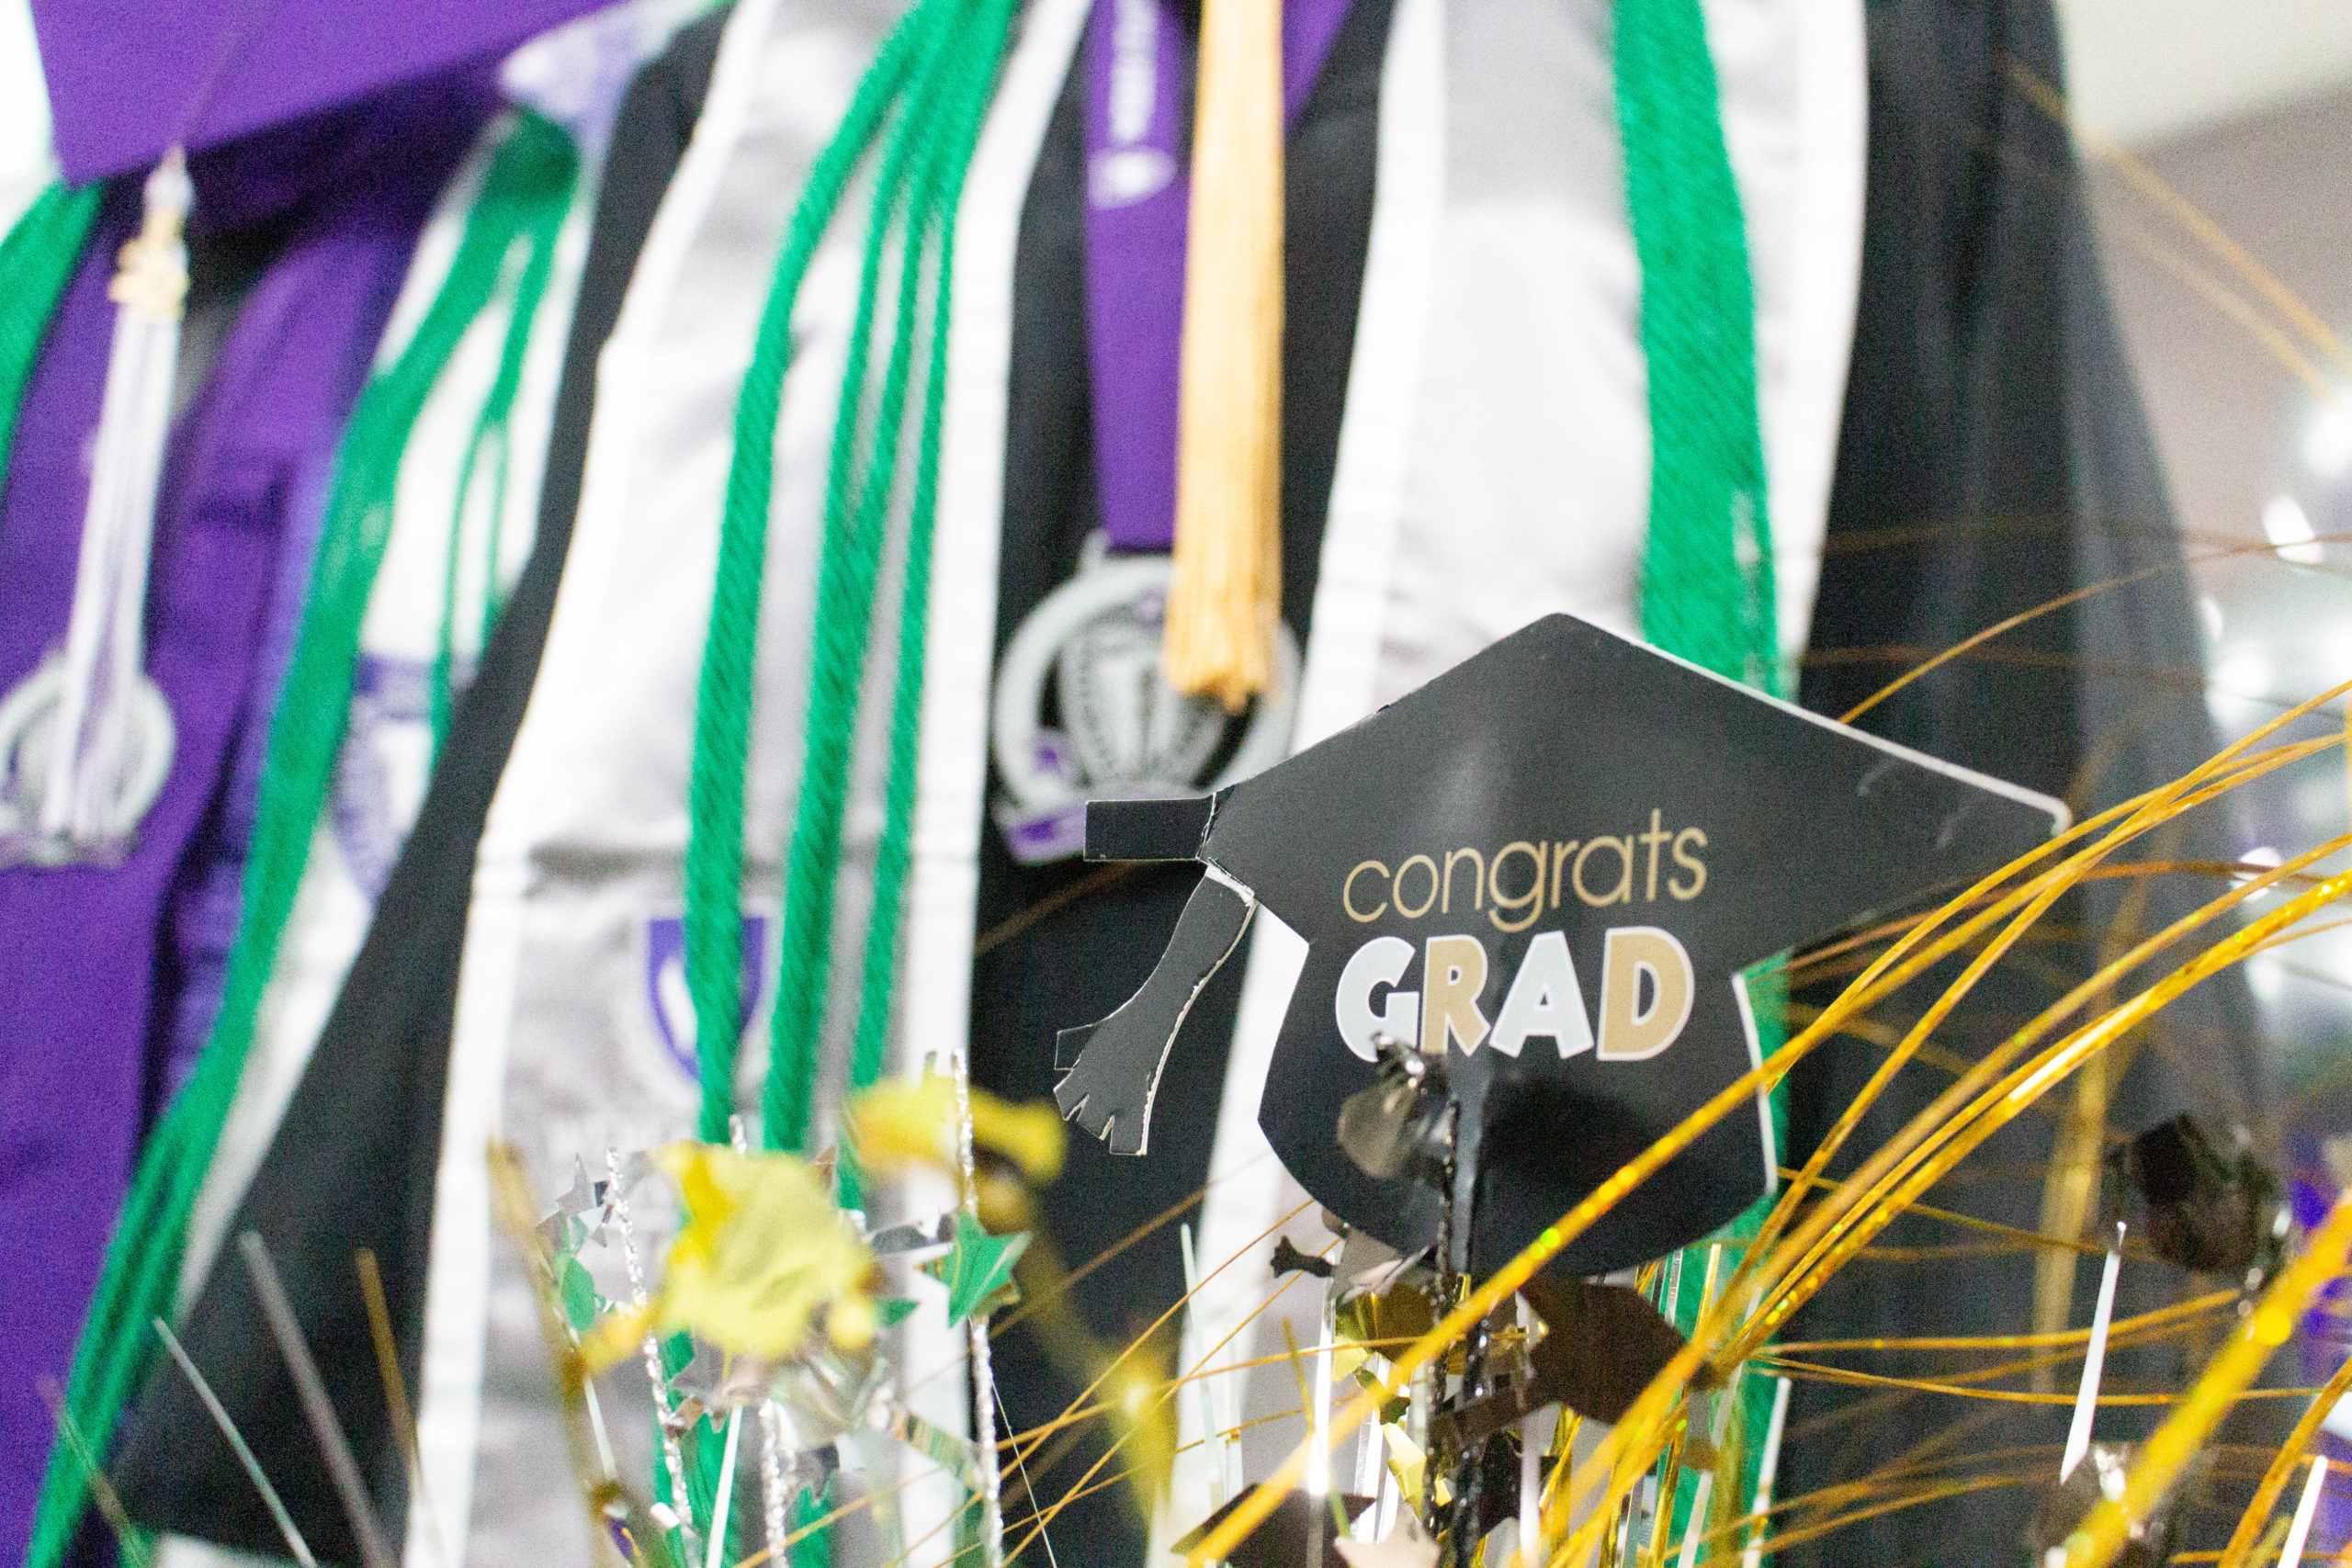 Decorations set out at grad finale along with graduation attire. Photo taken in December 2022.